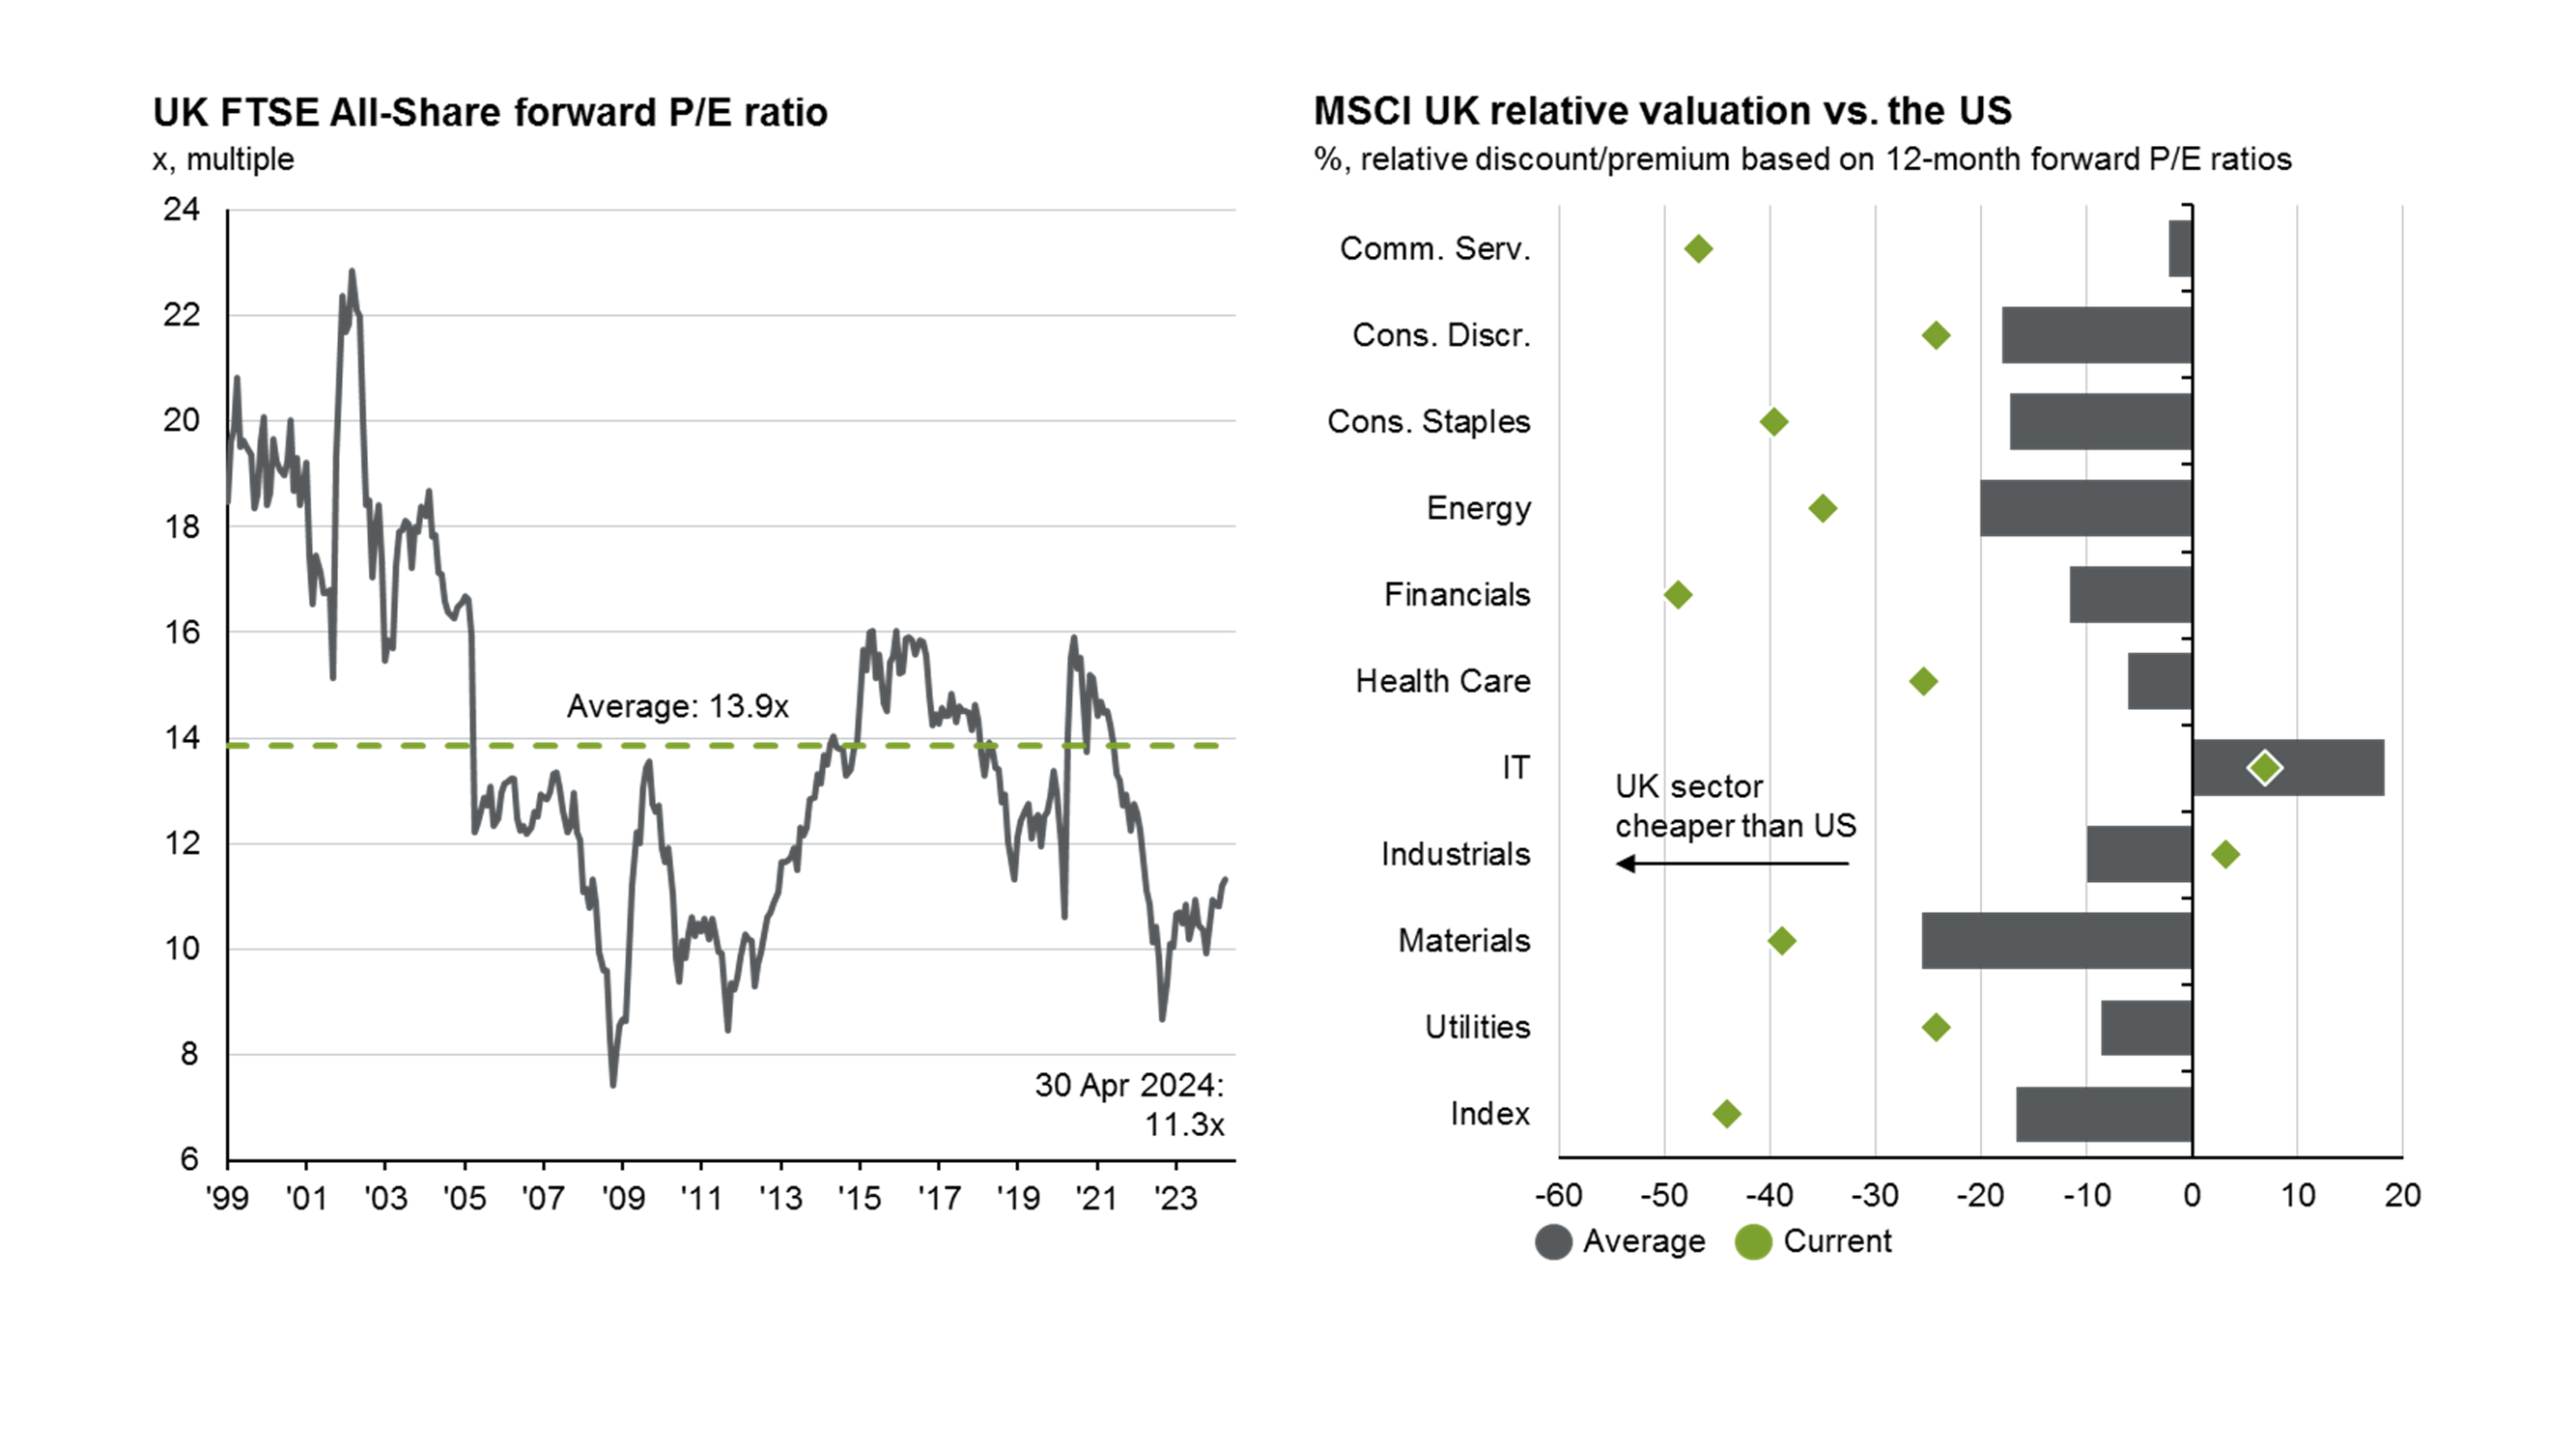 UK equity valuations